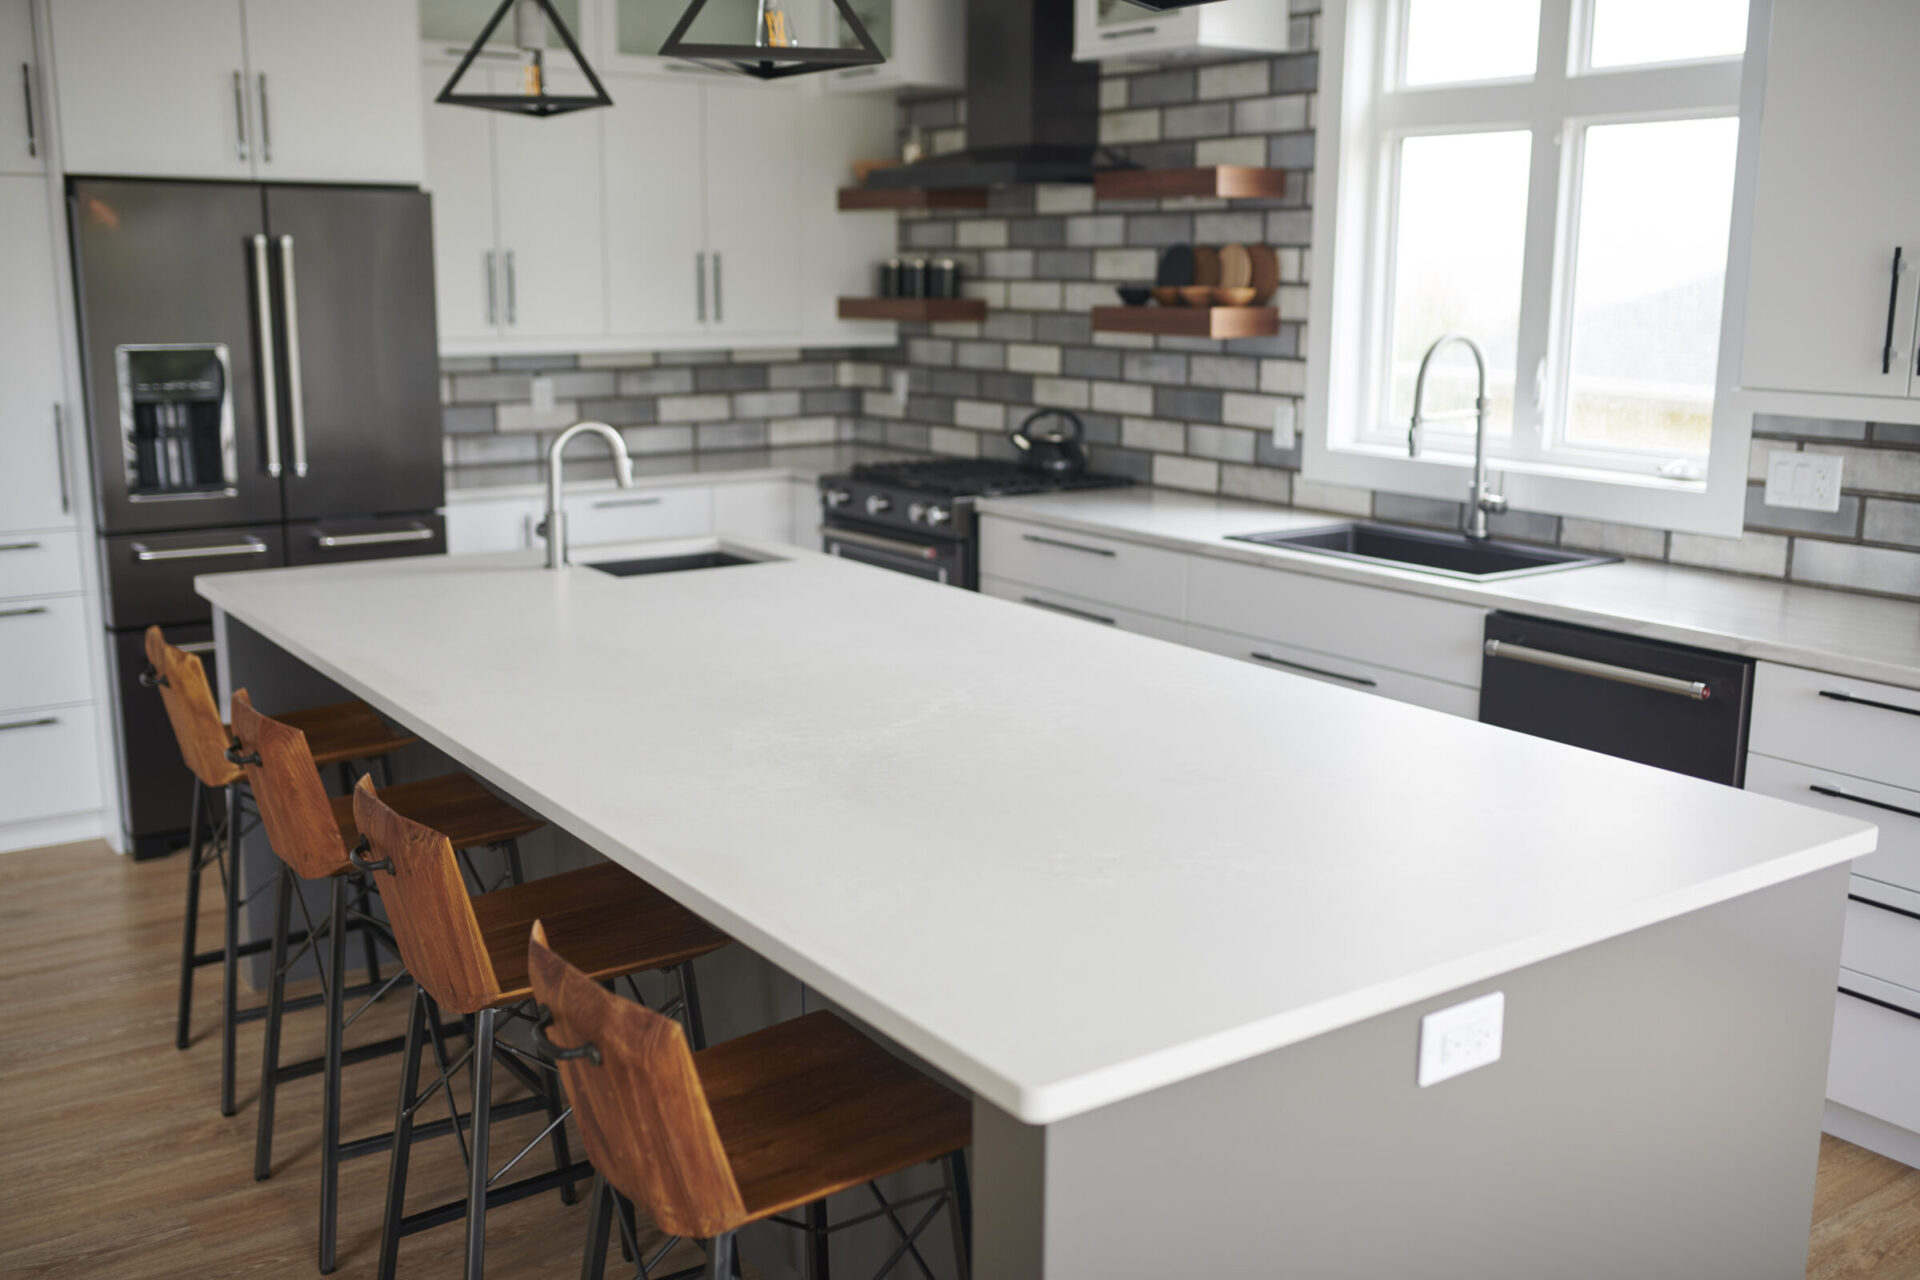 A modern kitchen with a large island, wooden chairs, stainless steel appliances, white countertops, gray cabinets, and a subway tile backsplash.